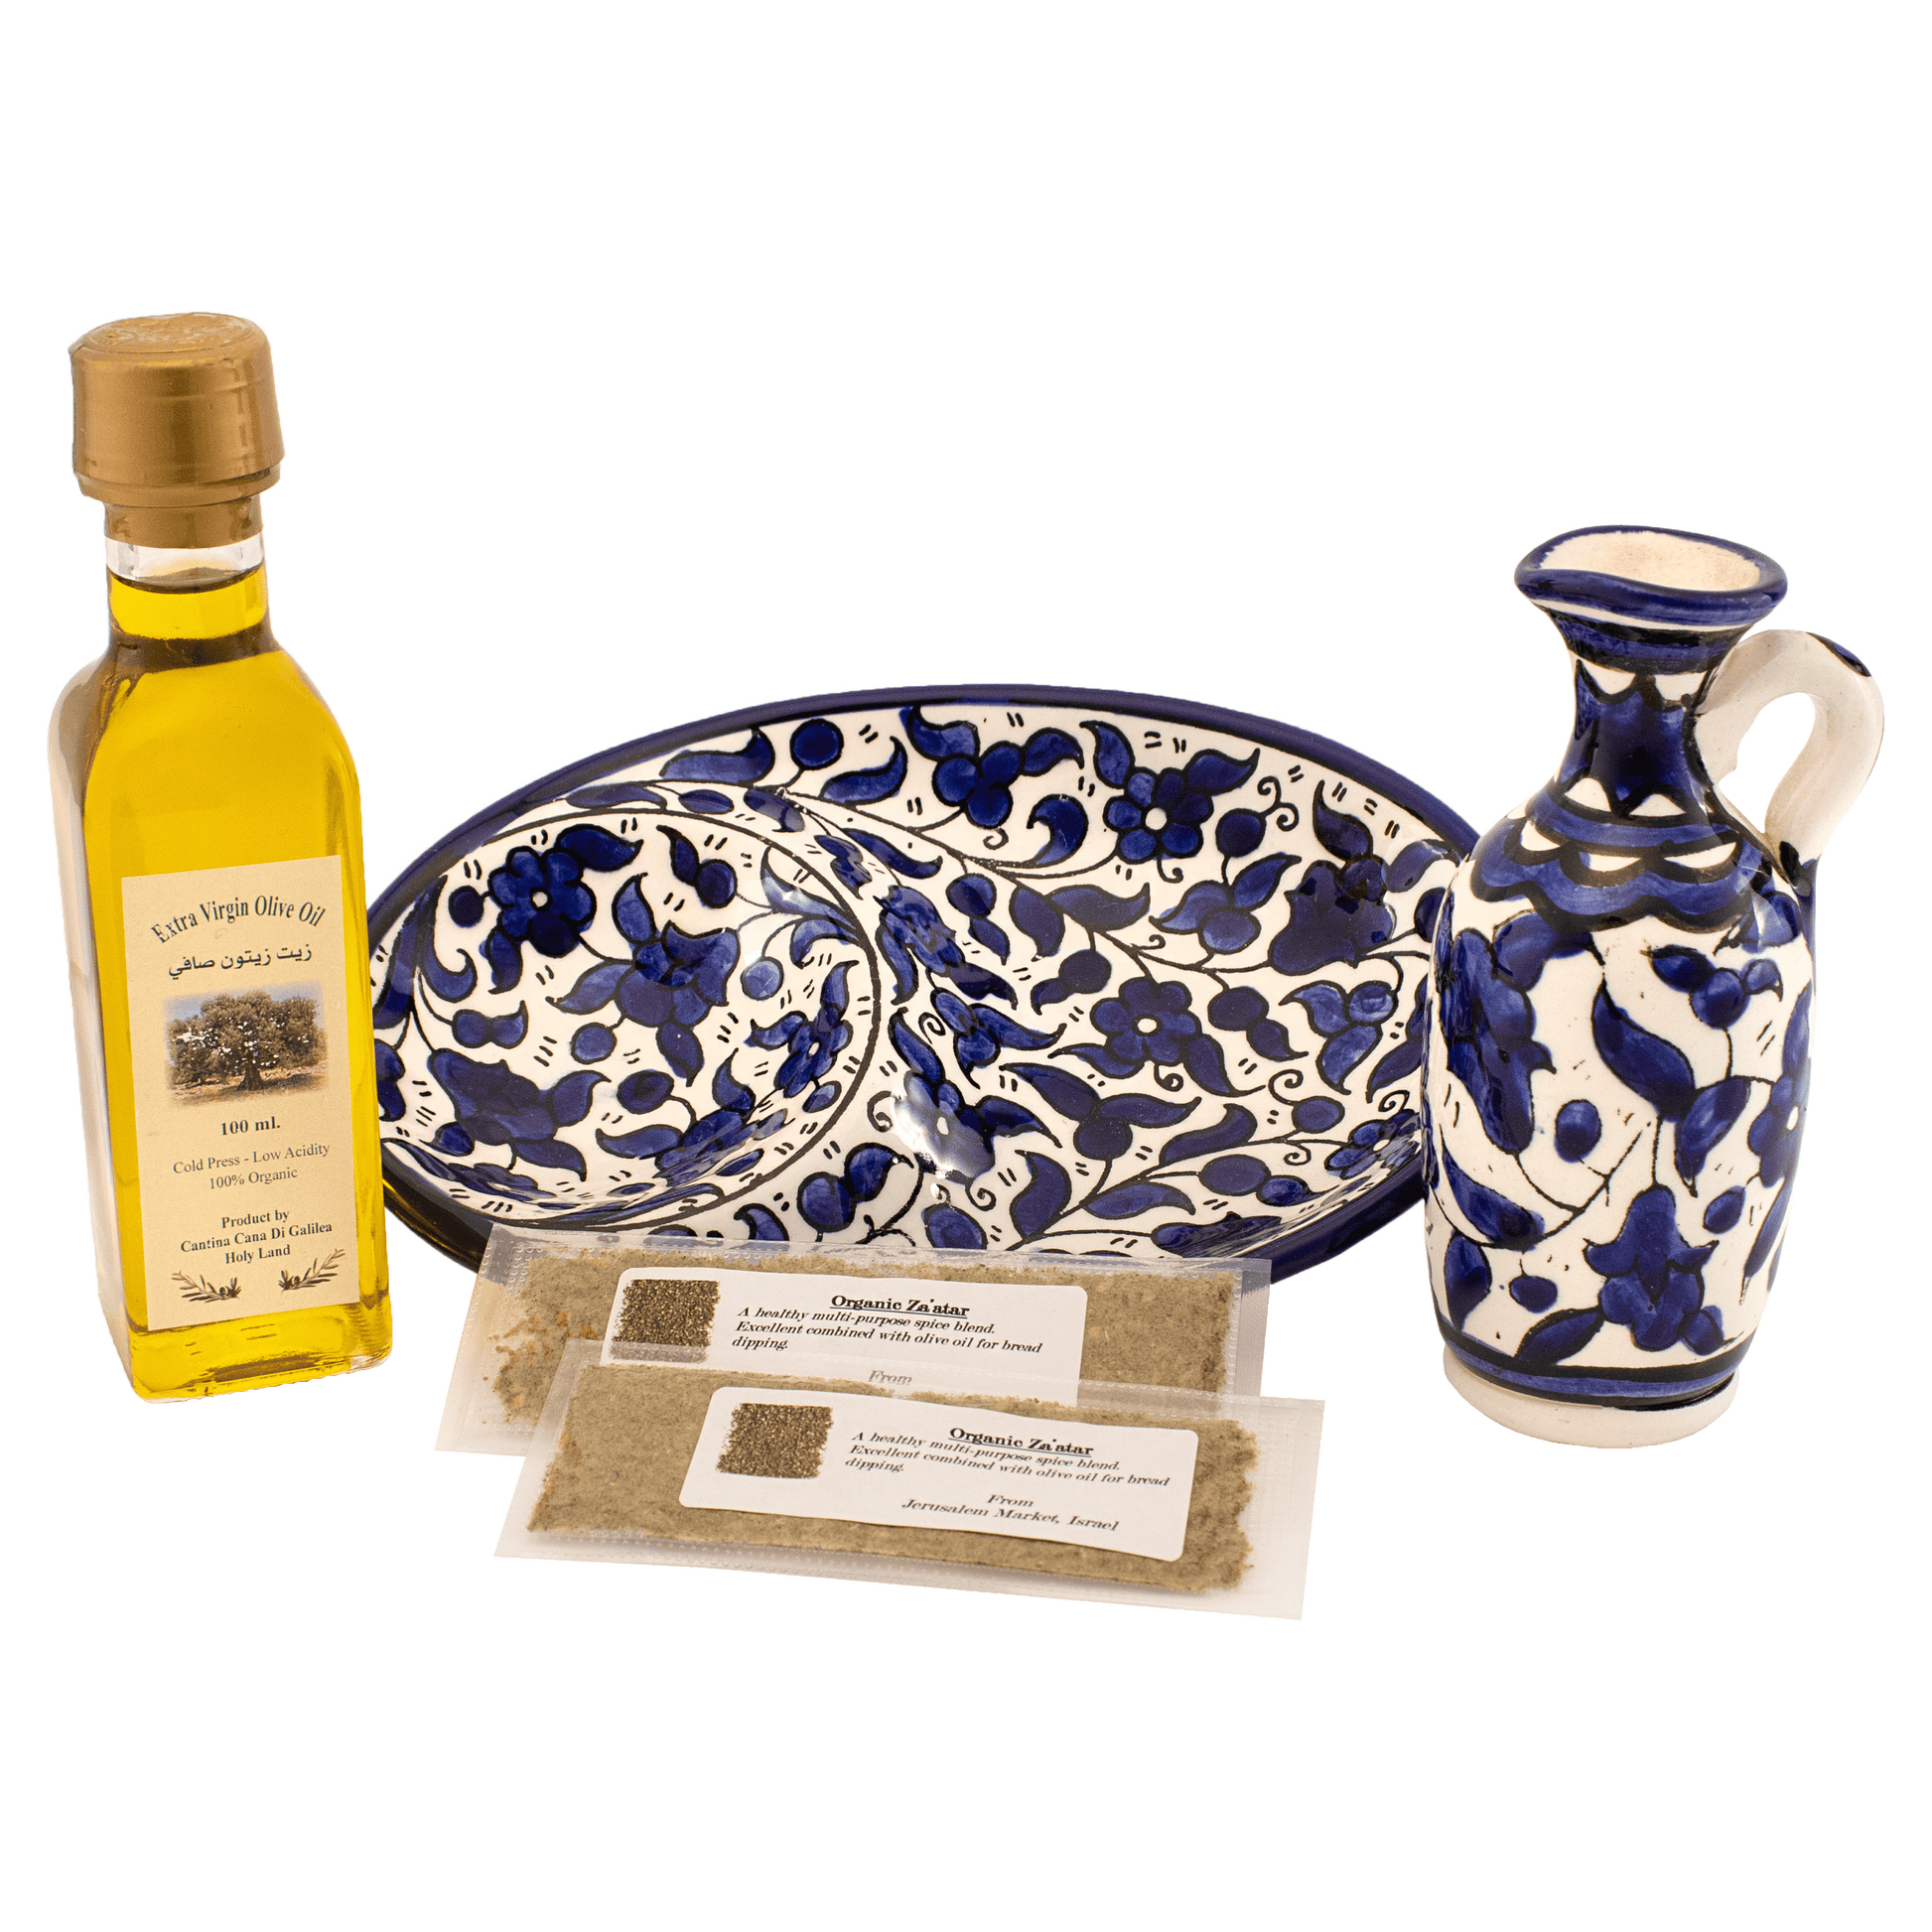 Armenian Dipping dish set with blue traditional floral designs, olive oil, and 2 sample Za'atar spice packets